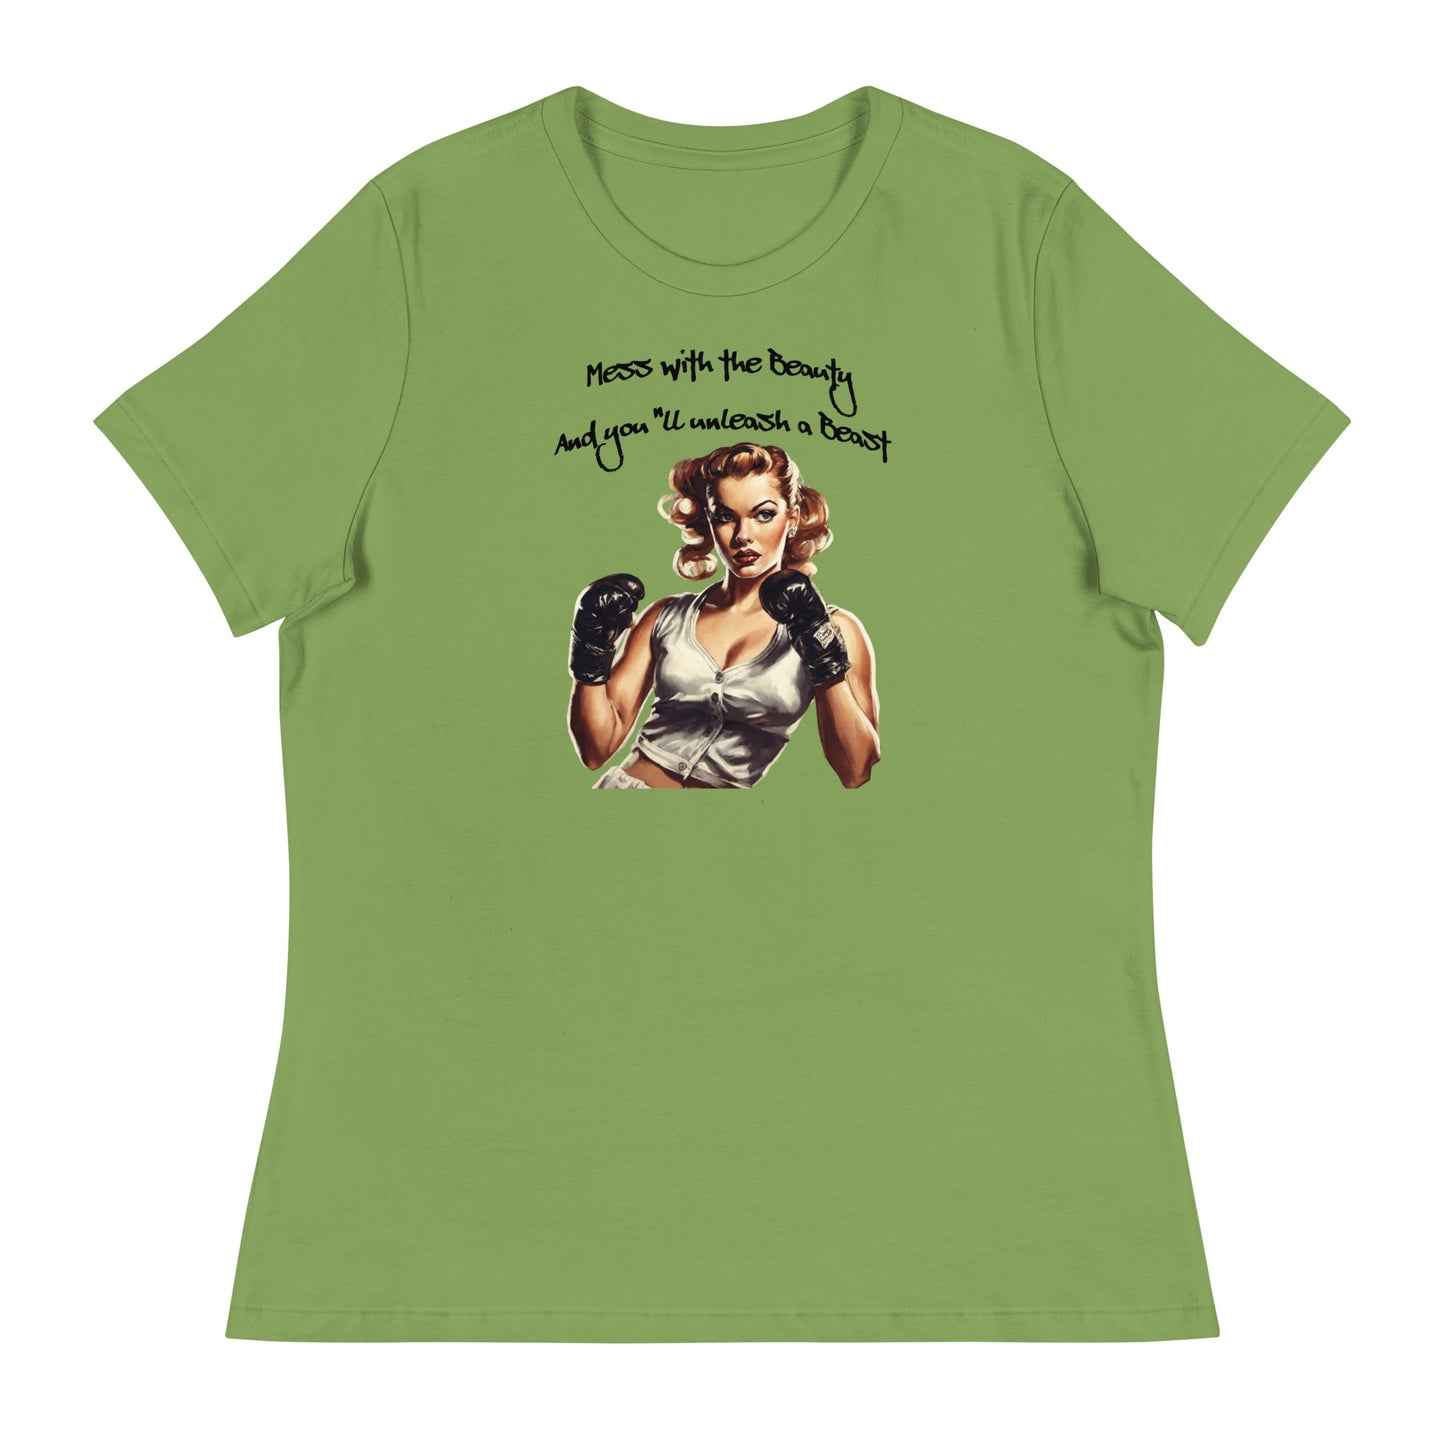 Mess with the Beauty, Unleash the Beast Women's Strength T-Shirt Leaf